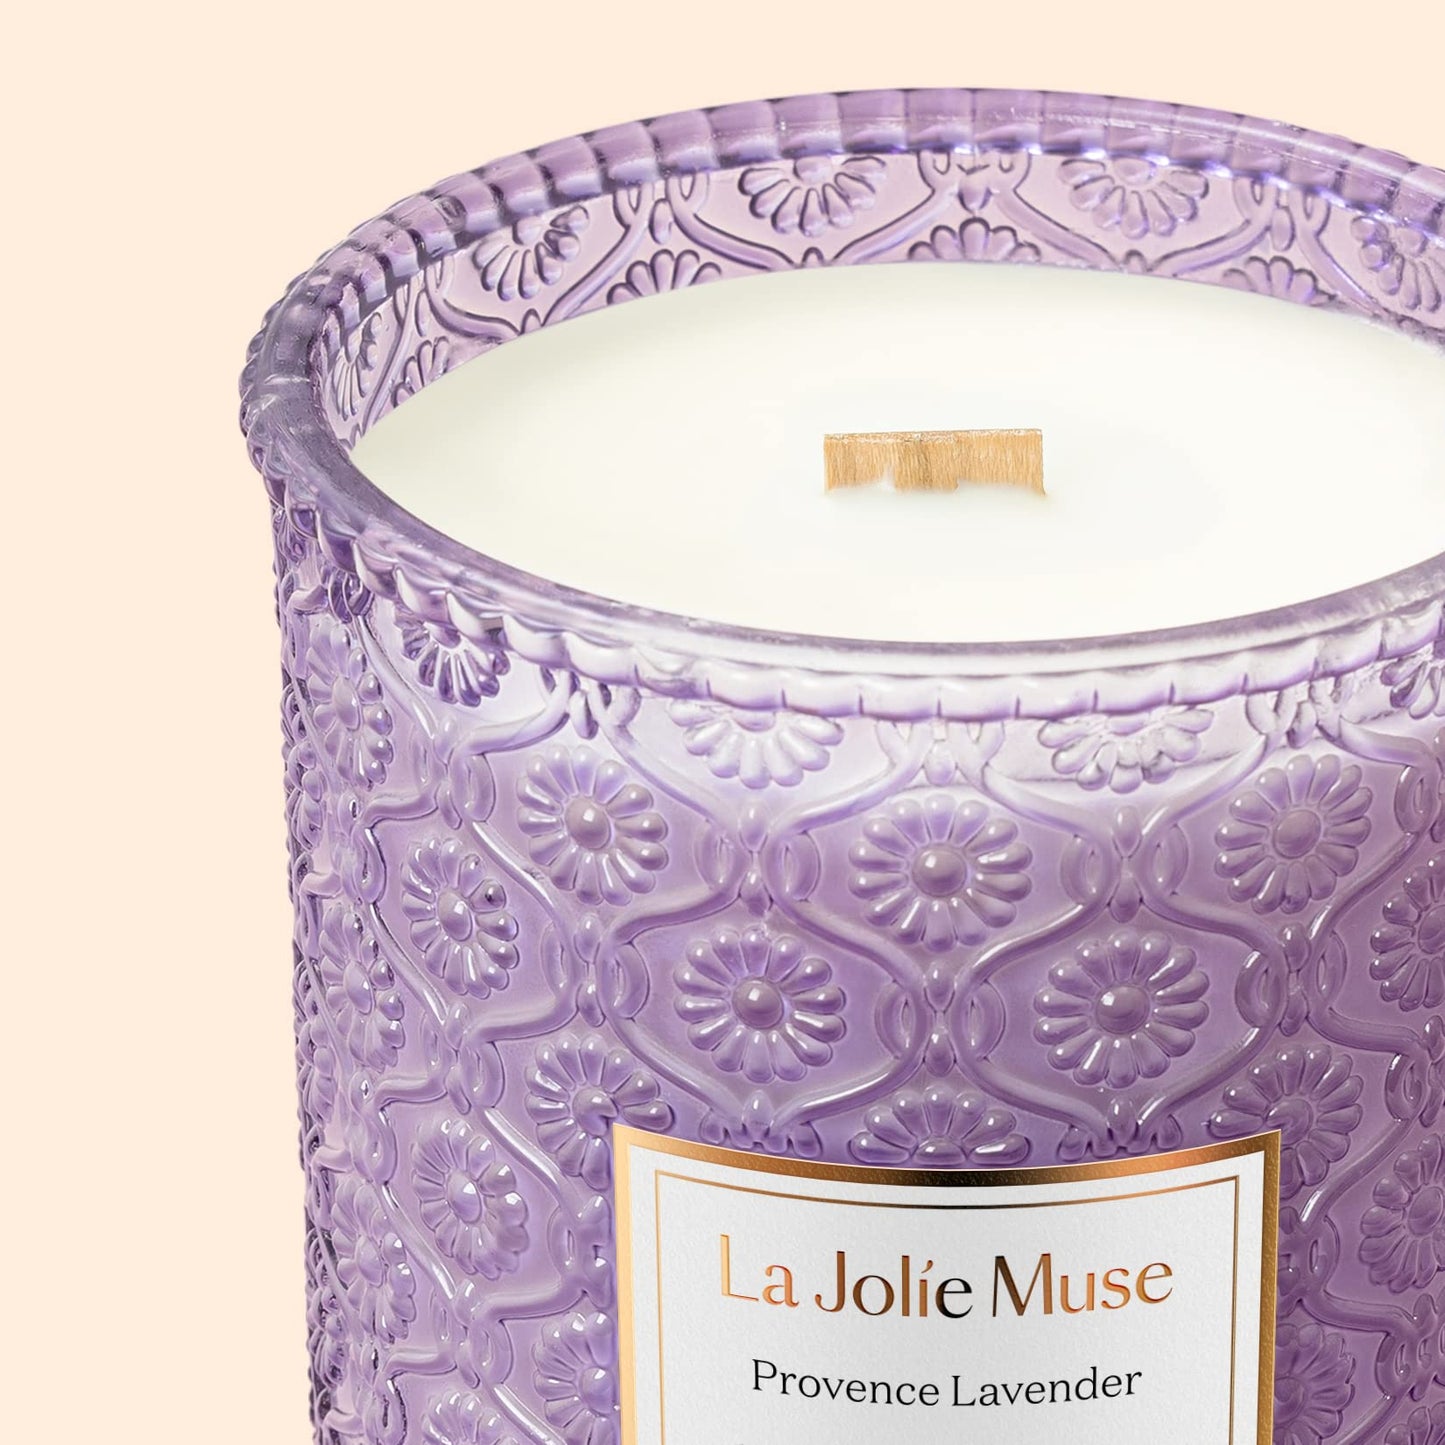 LA JOLIE MUSE Lavender Candle, Valentines Day Gifts for Her, Large Natural Soy Candle, 90 Hours Burning Time, Wood Wicked Candle, Aromatherapy Candle Gifts for Women, Luxury Candles for Home